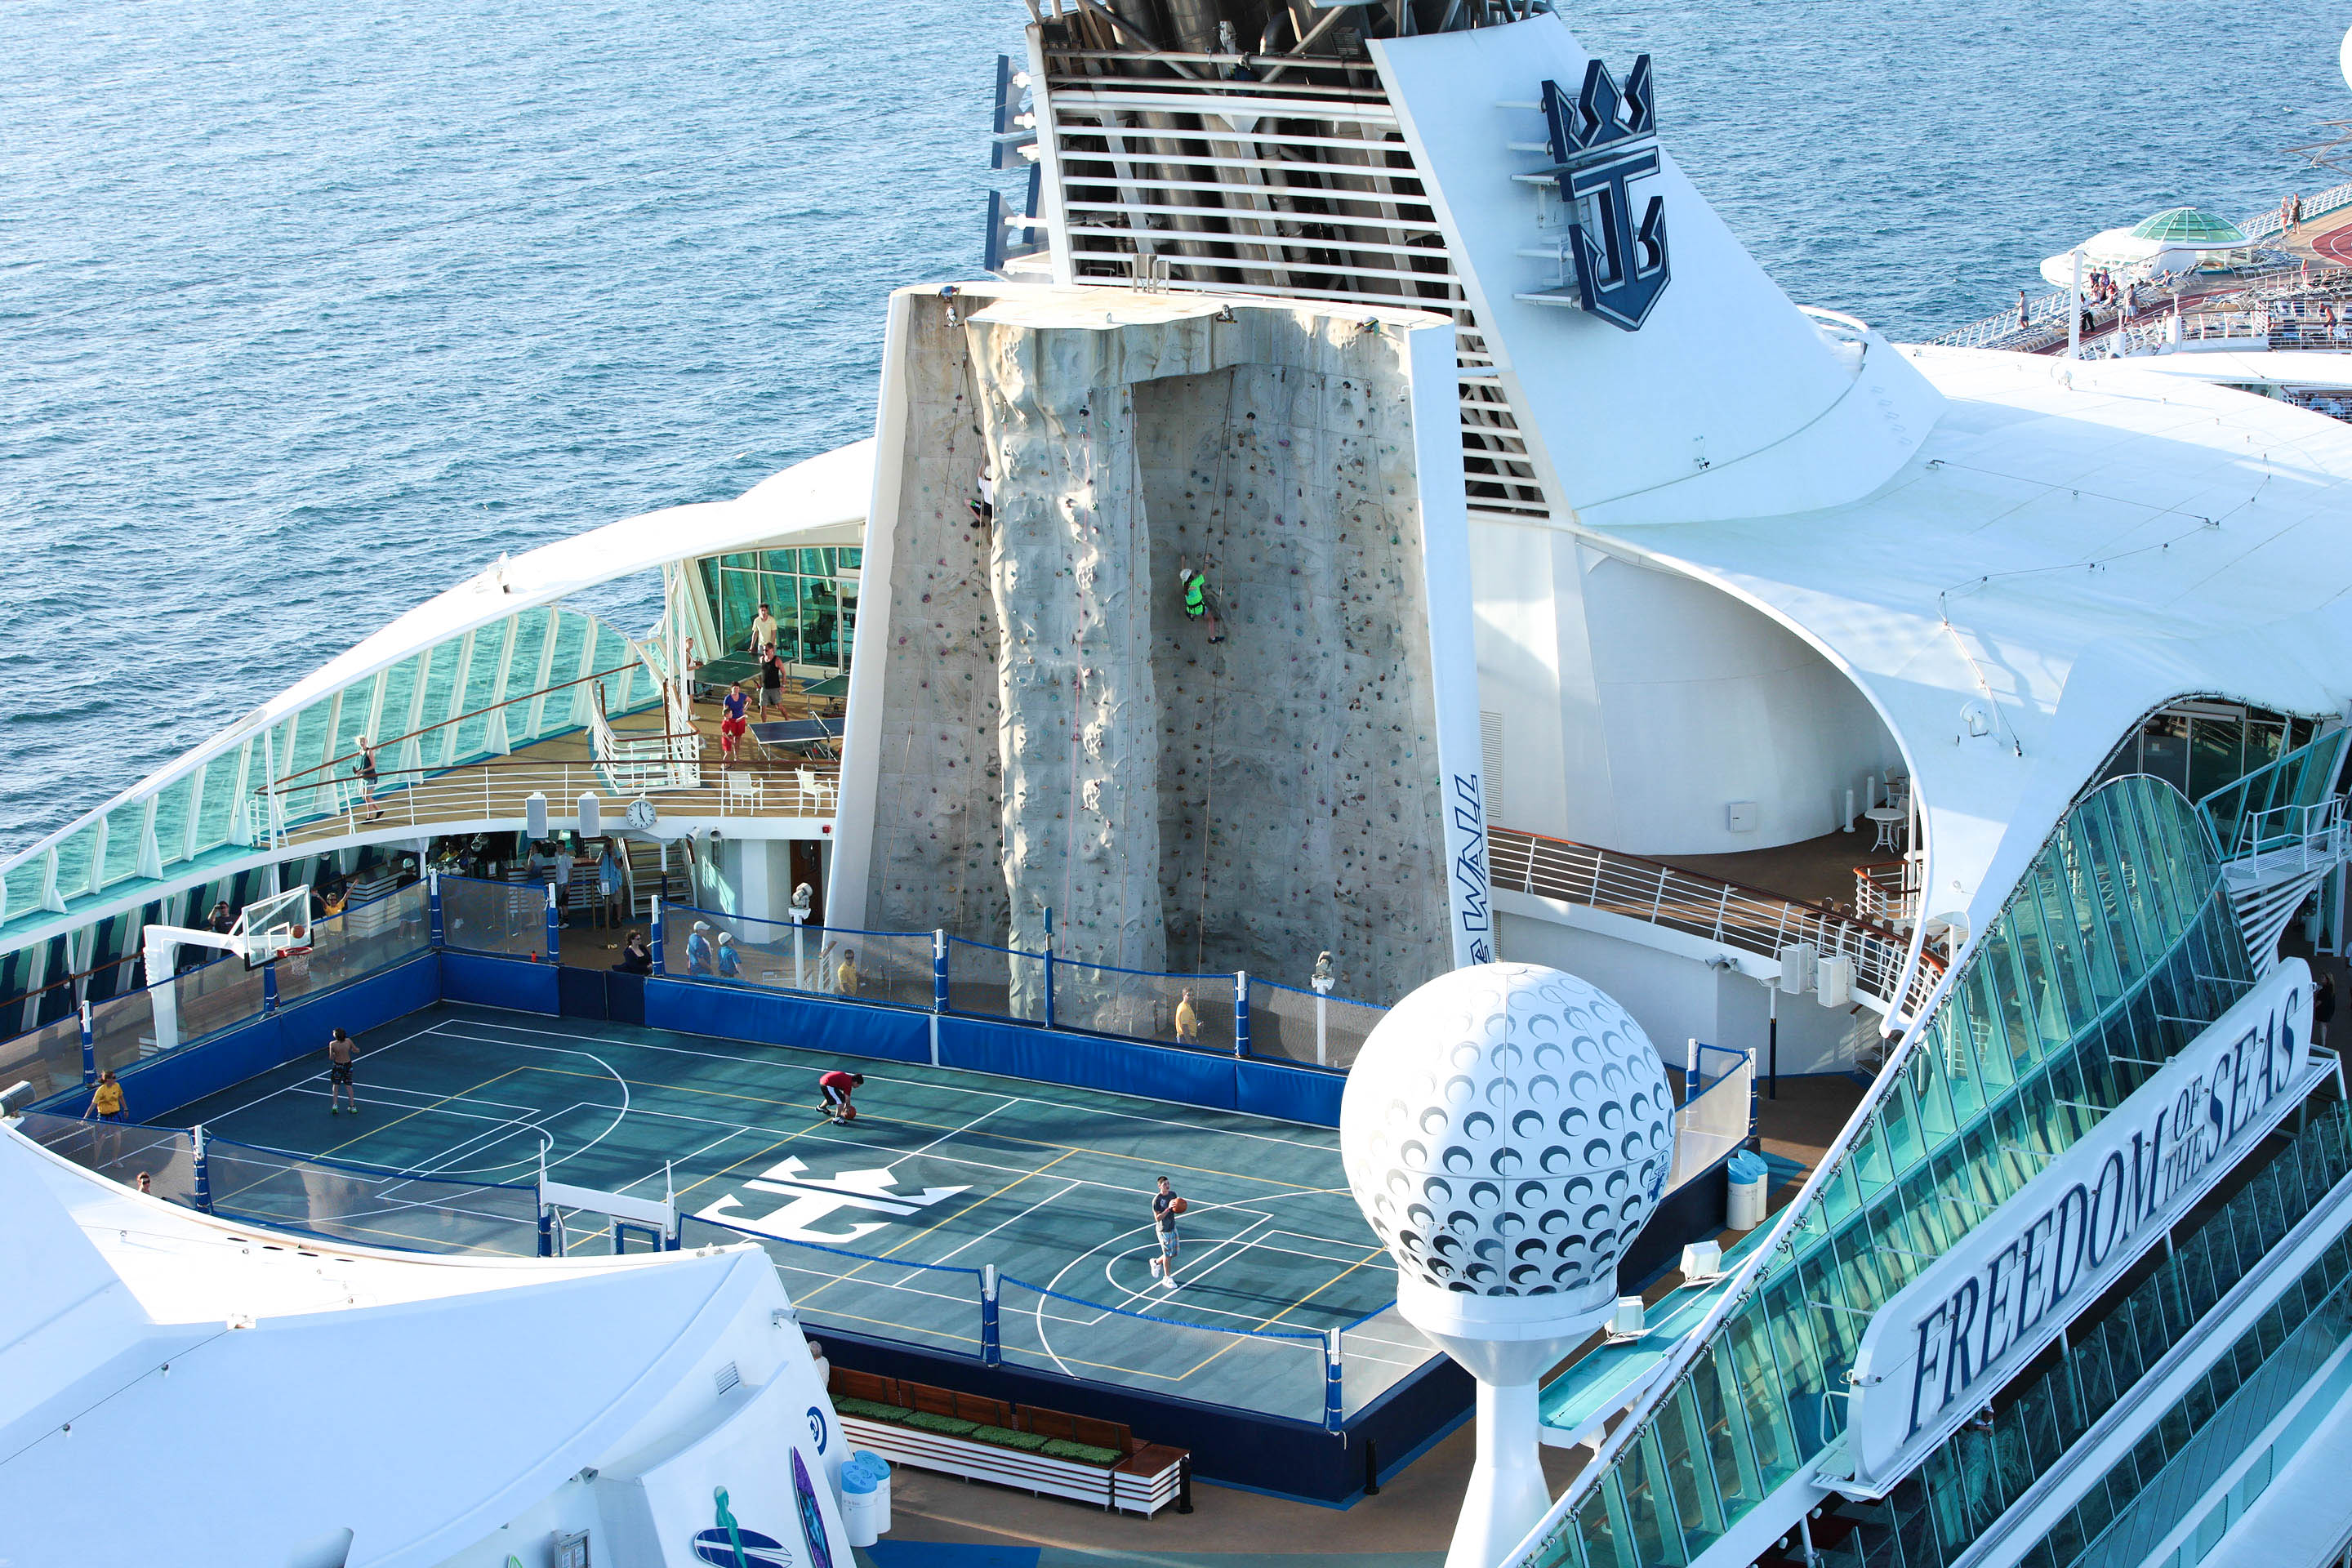 Things To Do Freedom Of The Seas Royal Caribbean Cruises